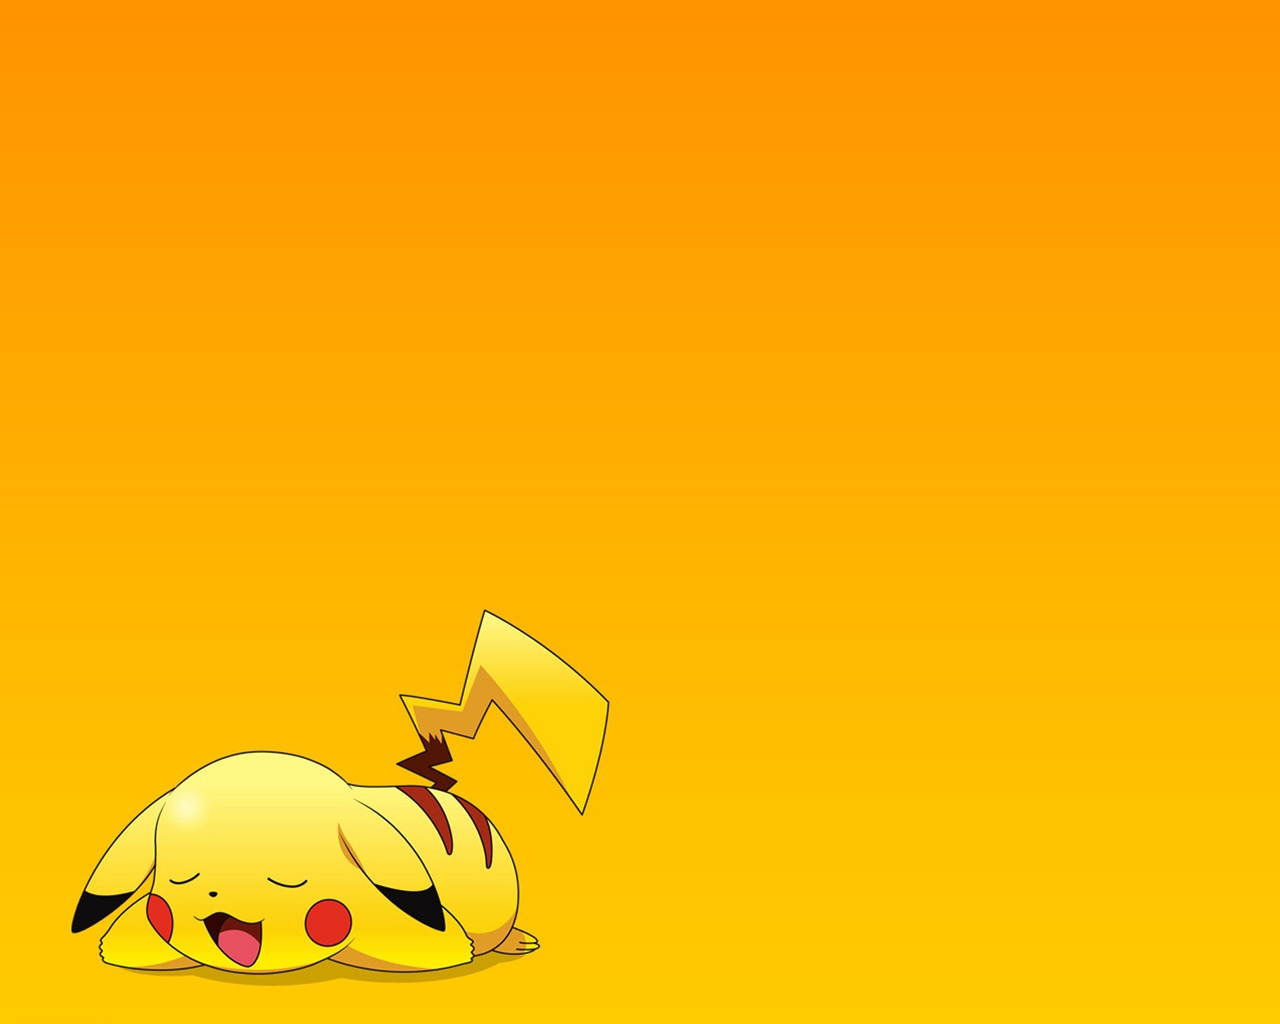 Pikachu for 1280 x 1024 resolution